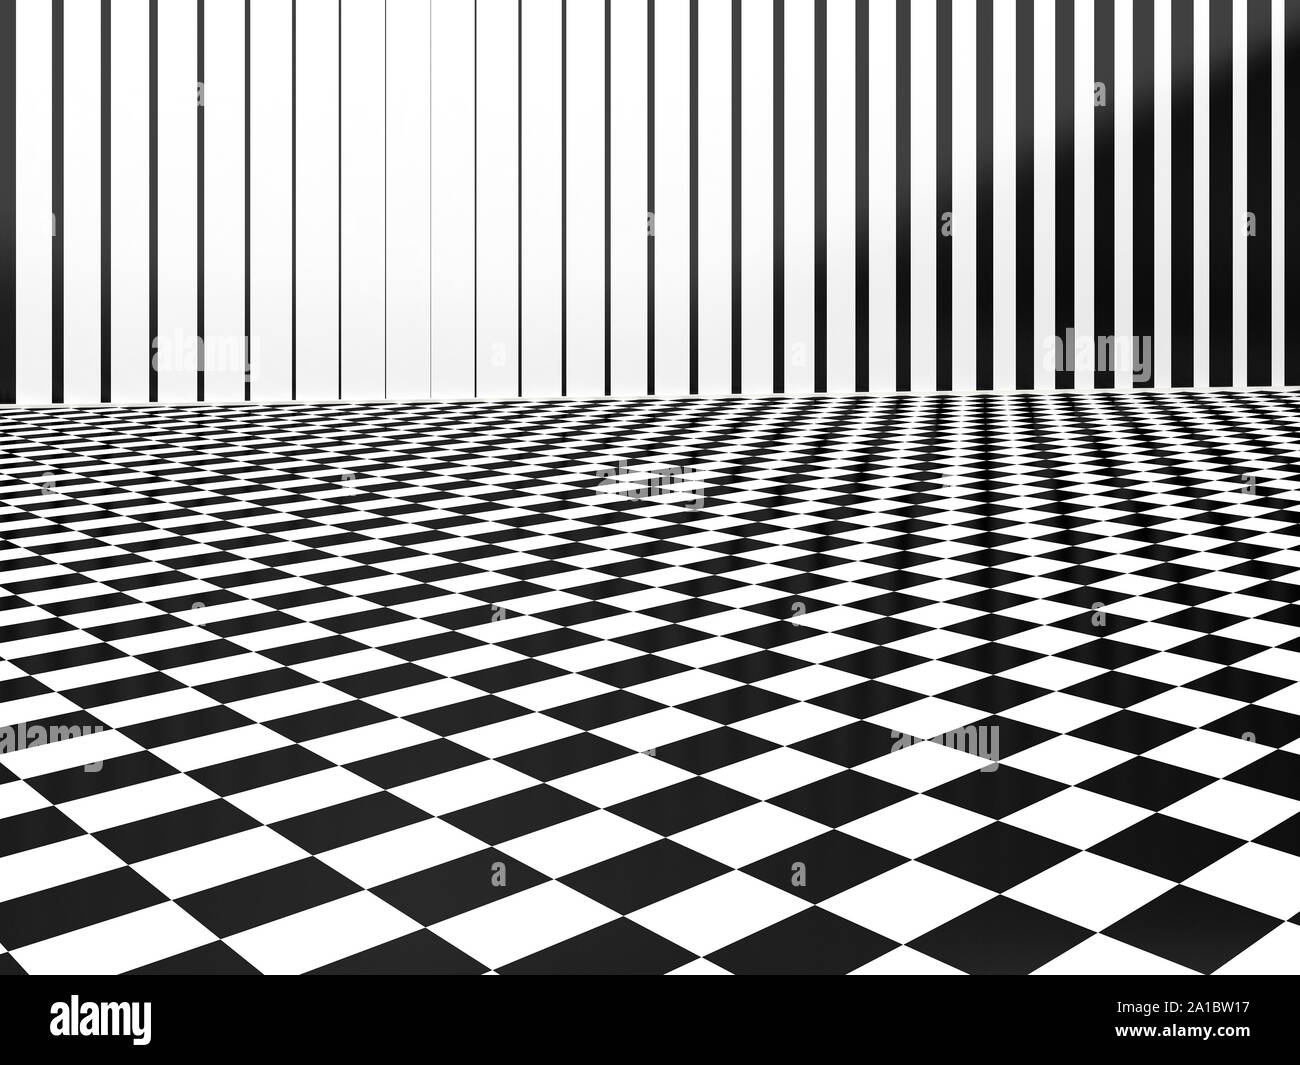 checkers background Stock Photo